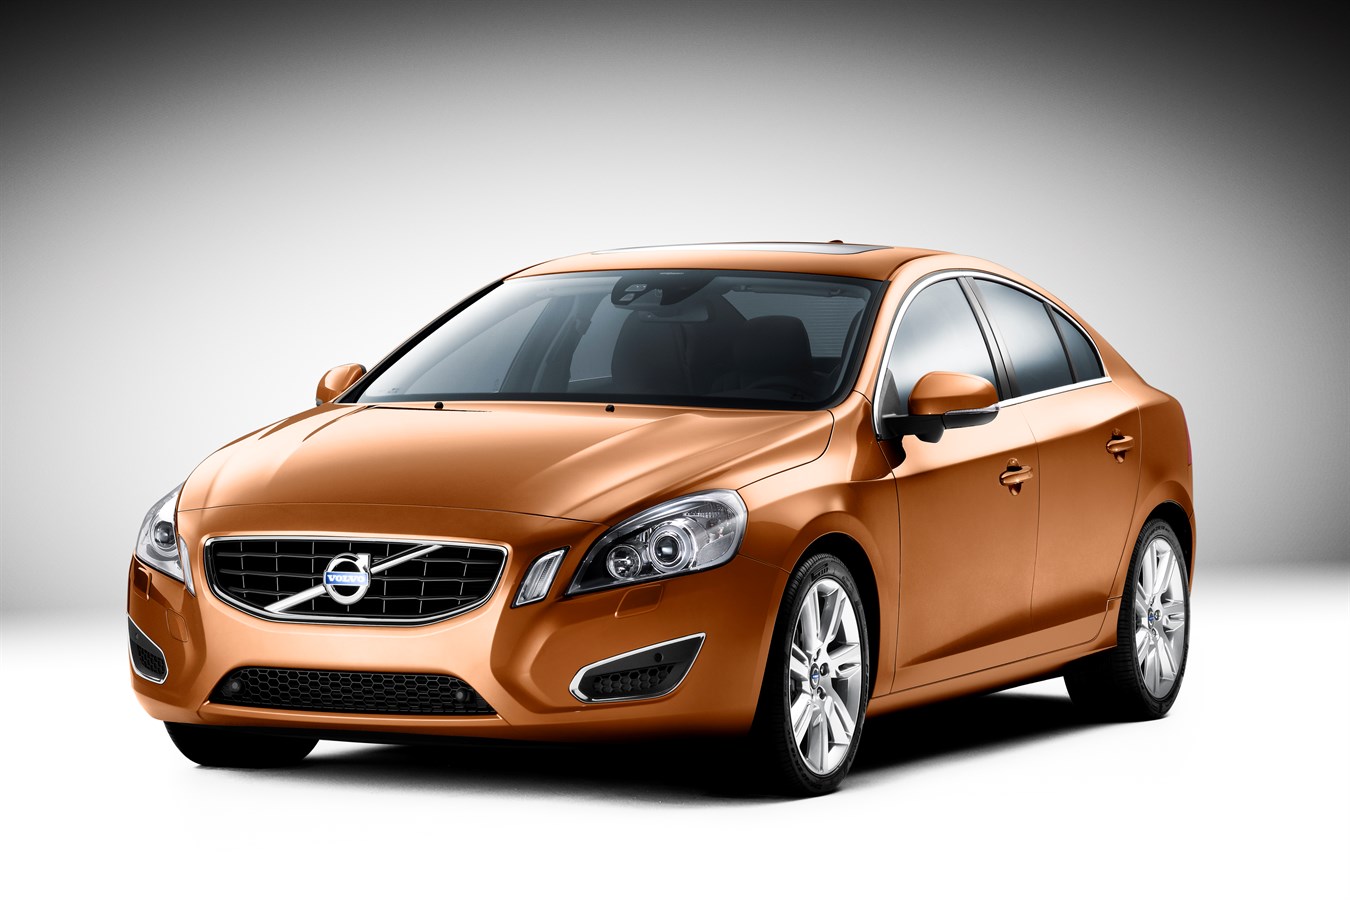 All-new Volvo S60